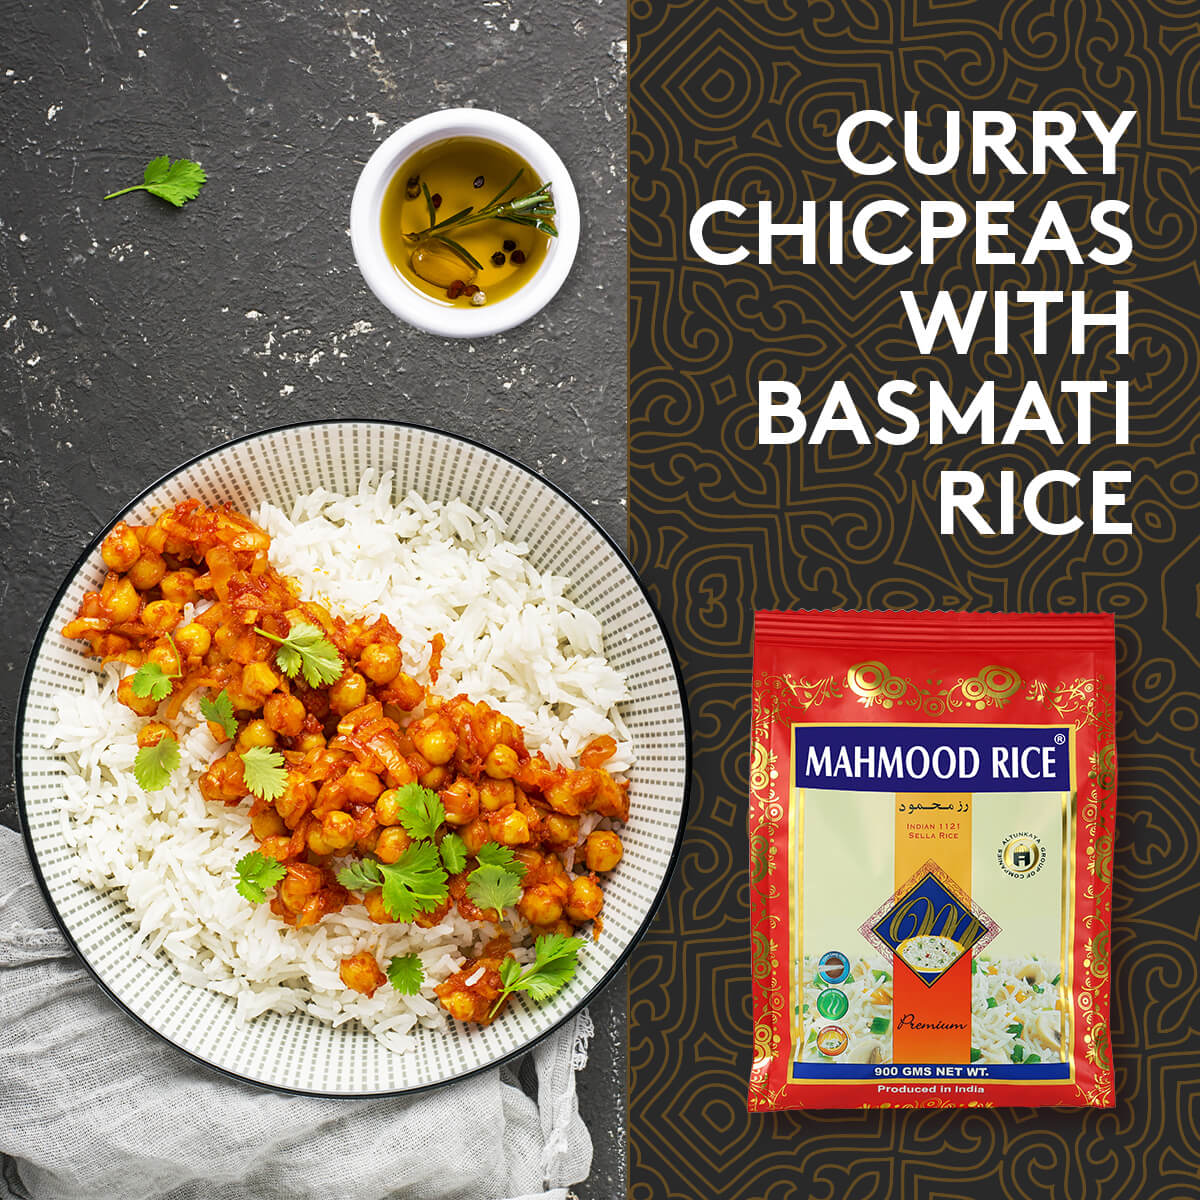 Curry Chicpeas with Basmati Rice